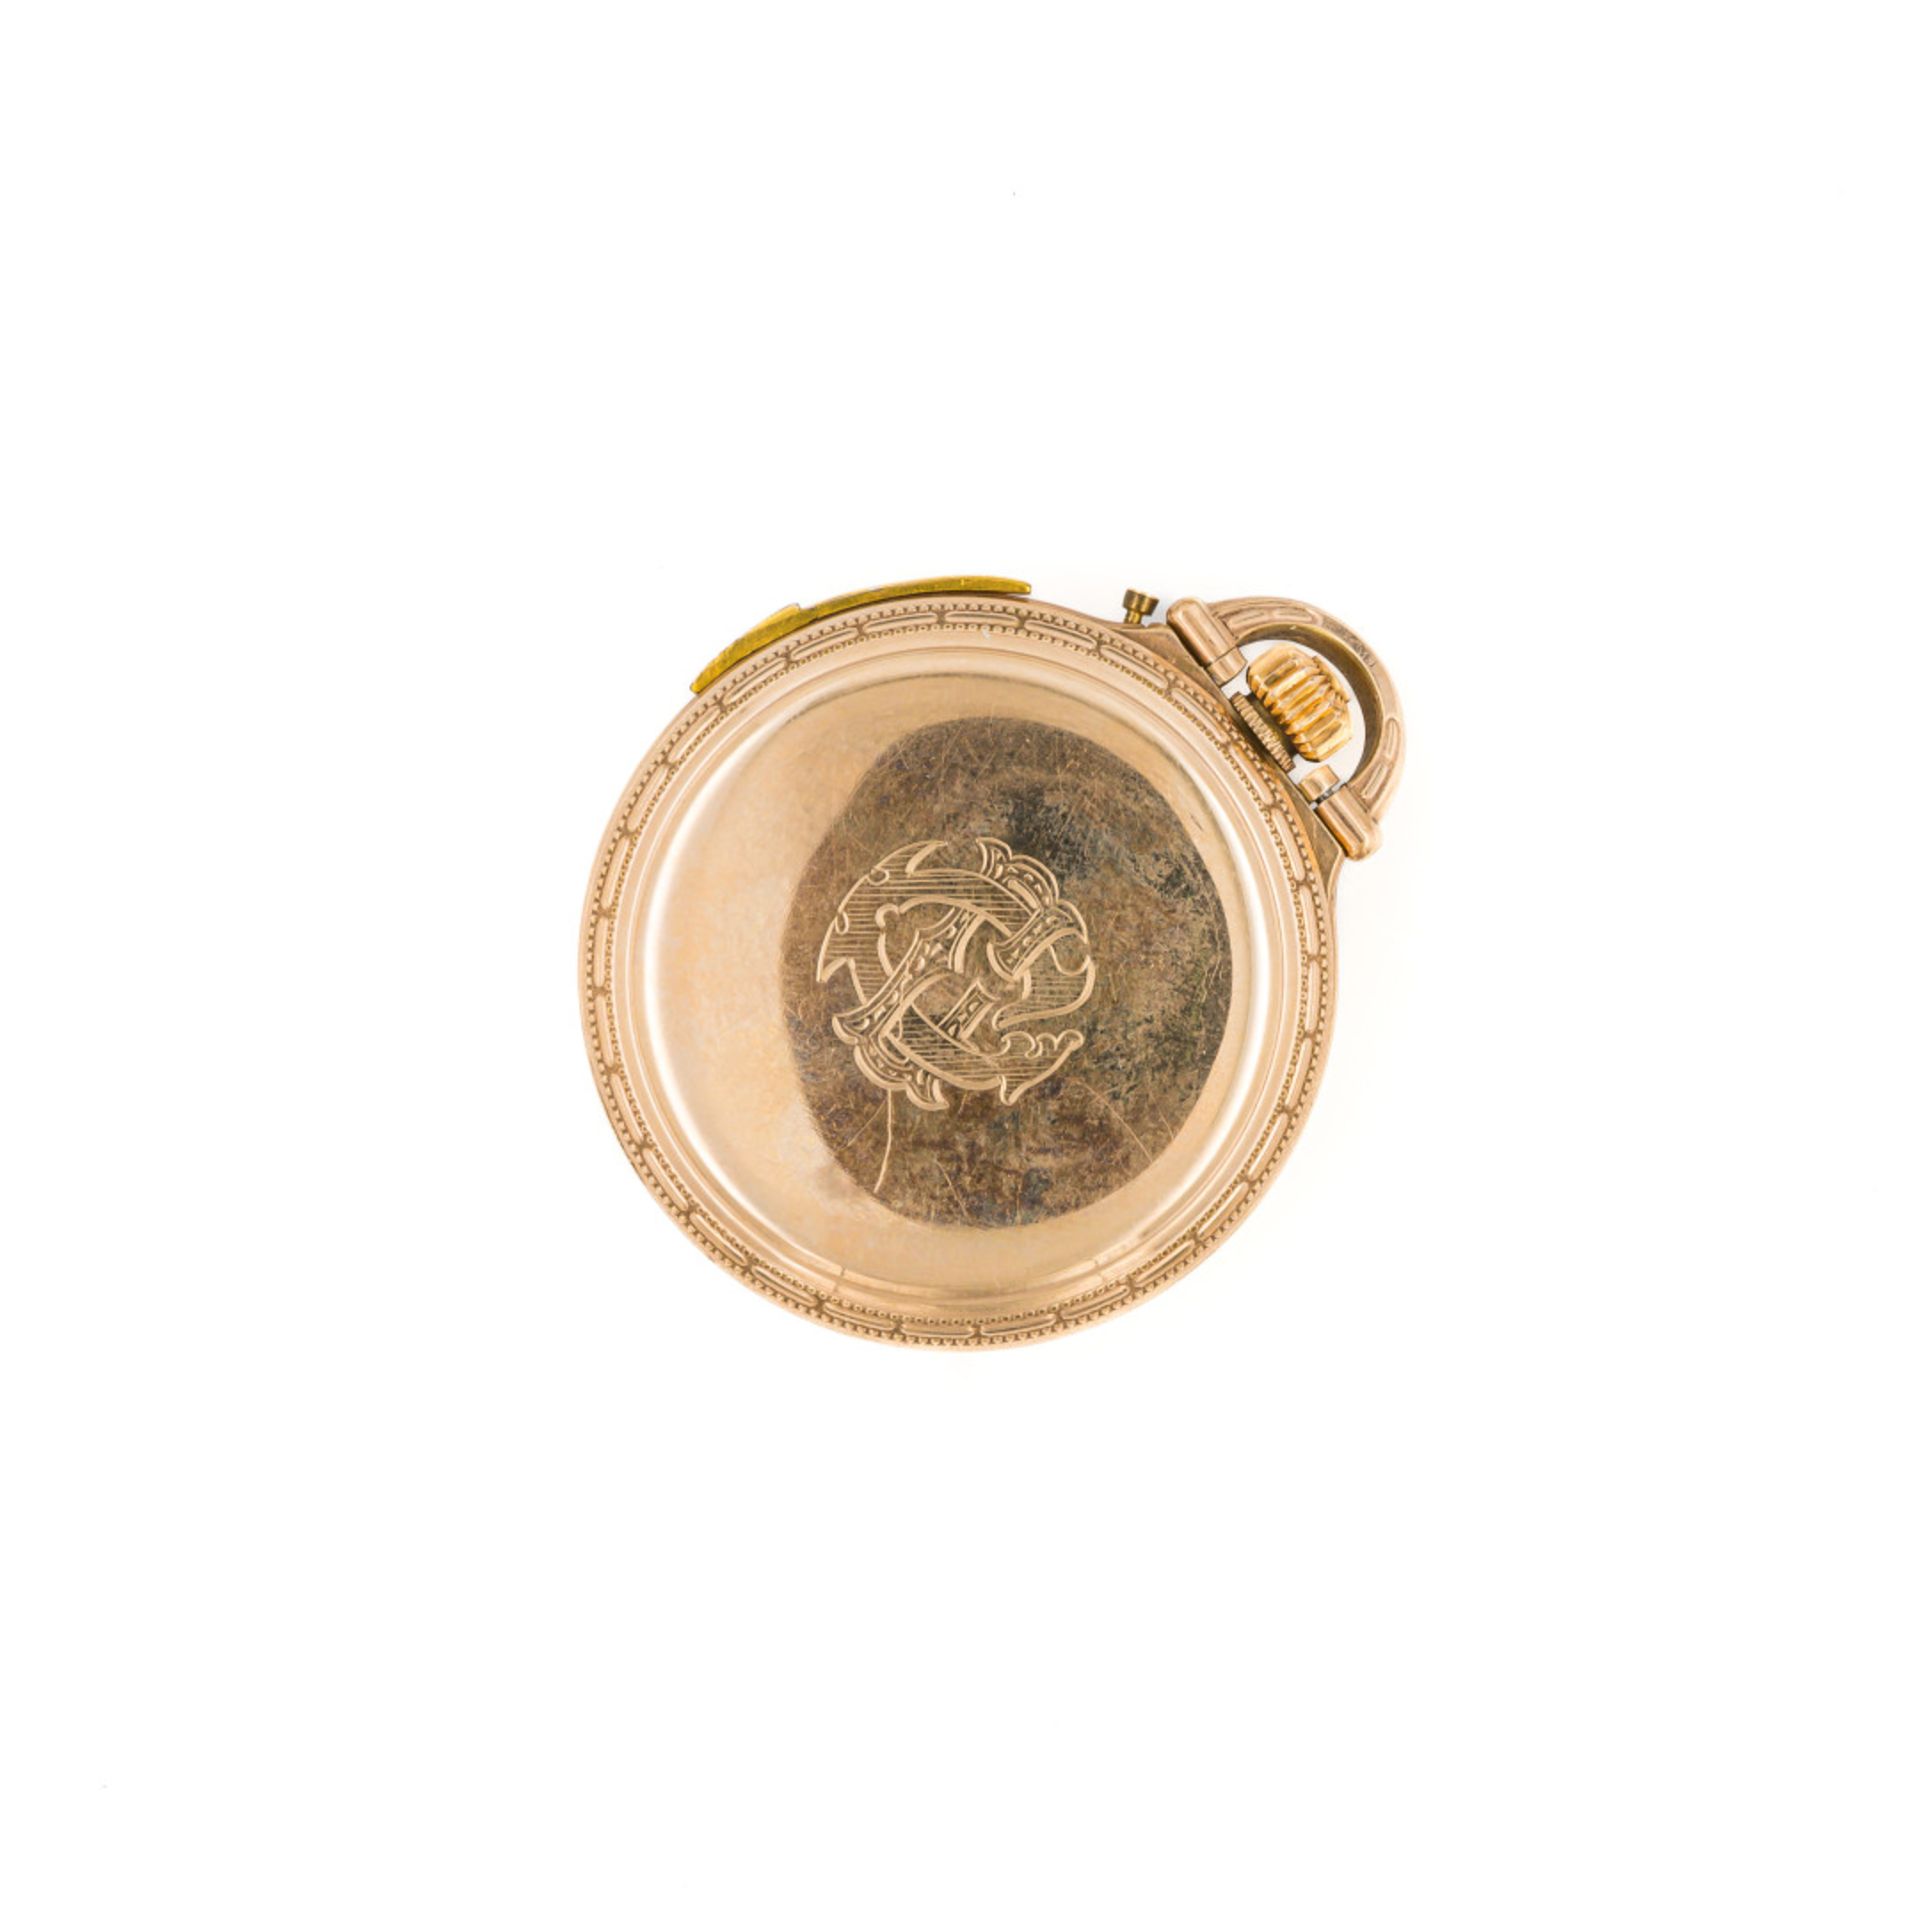 REPEATER WATCH, 20s - REPEATER WATCH, 20S Case: signed Keystone Watch Case, n. 9732208, three-body - Image 3 of 3